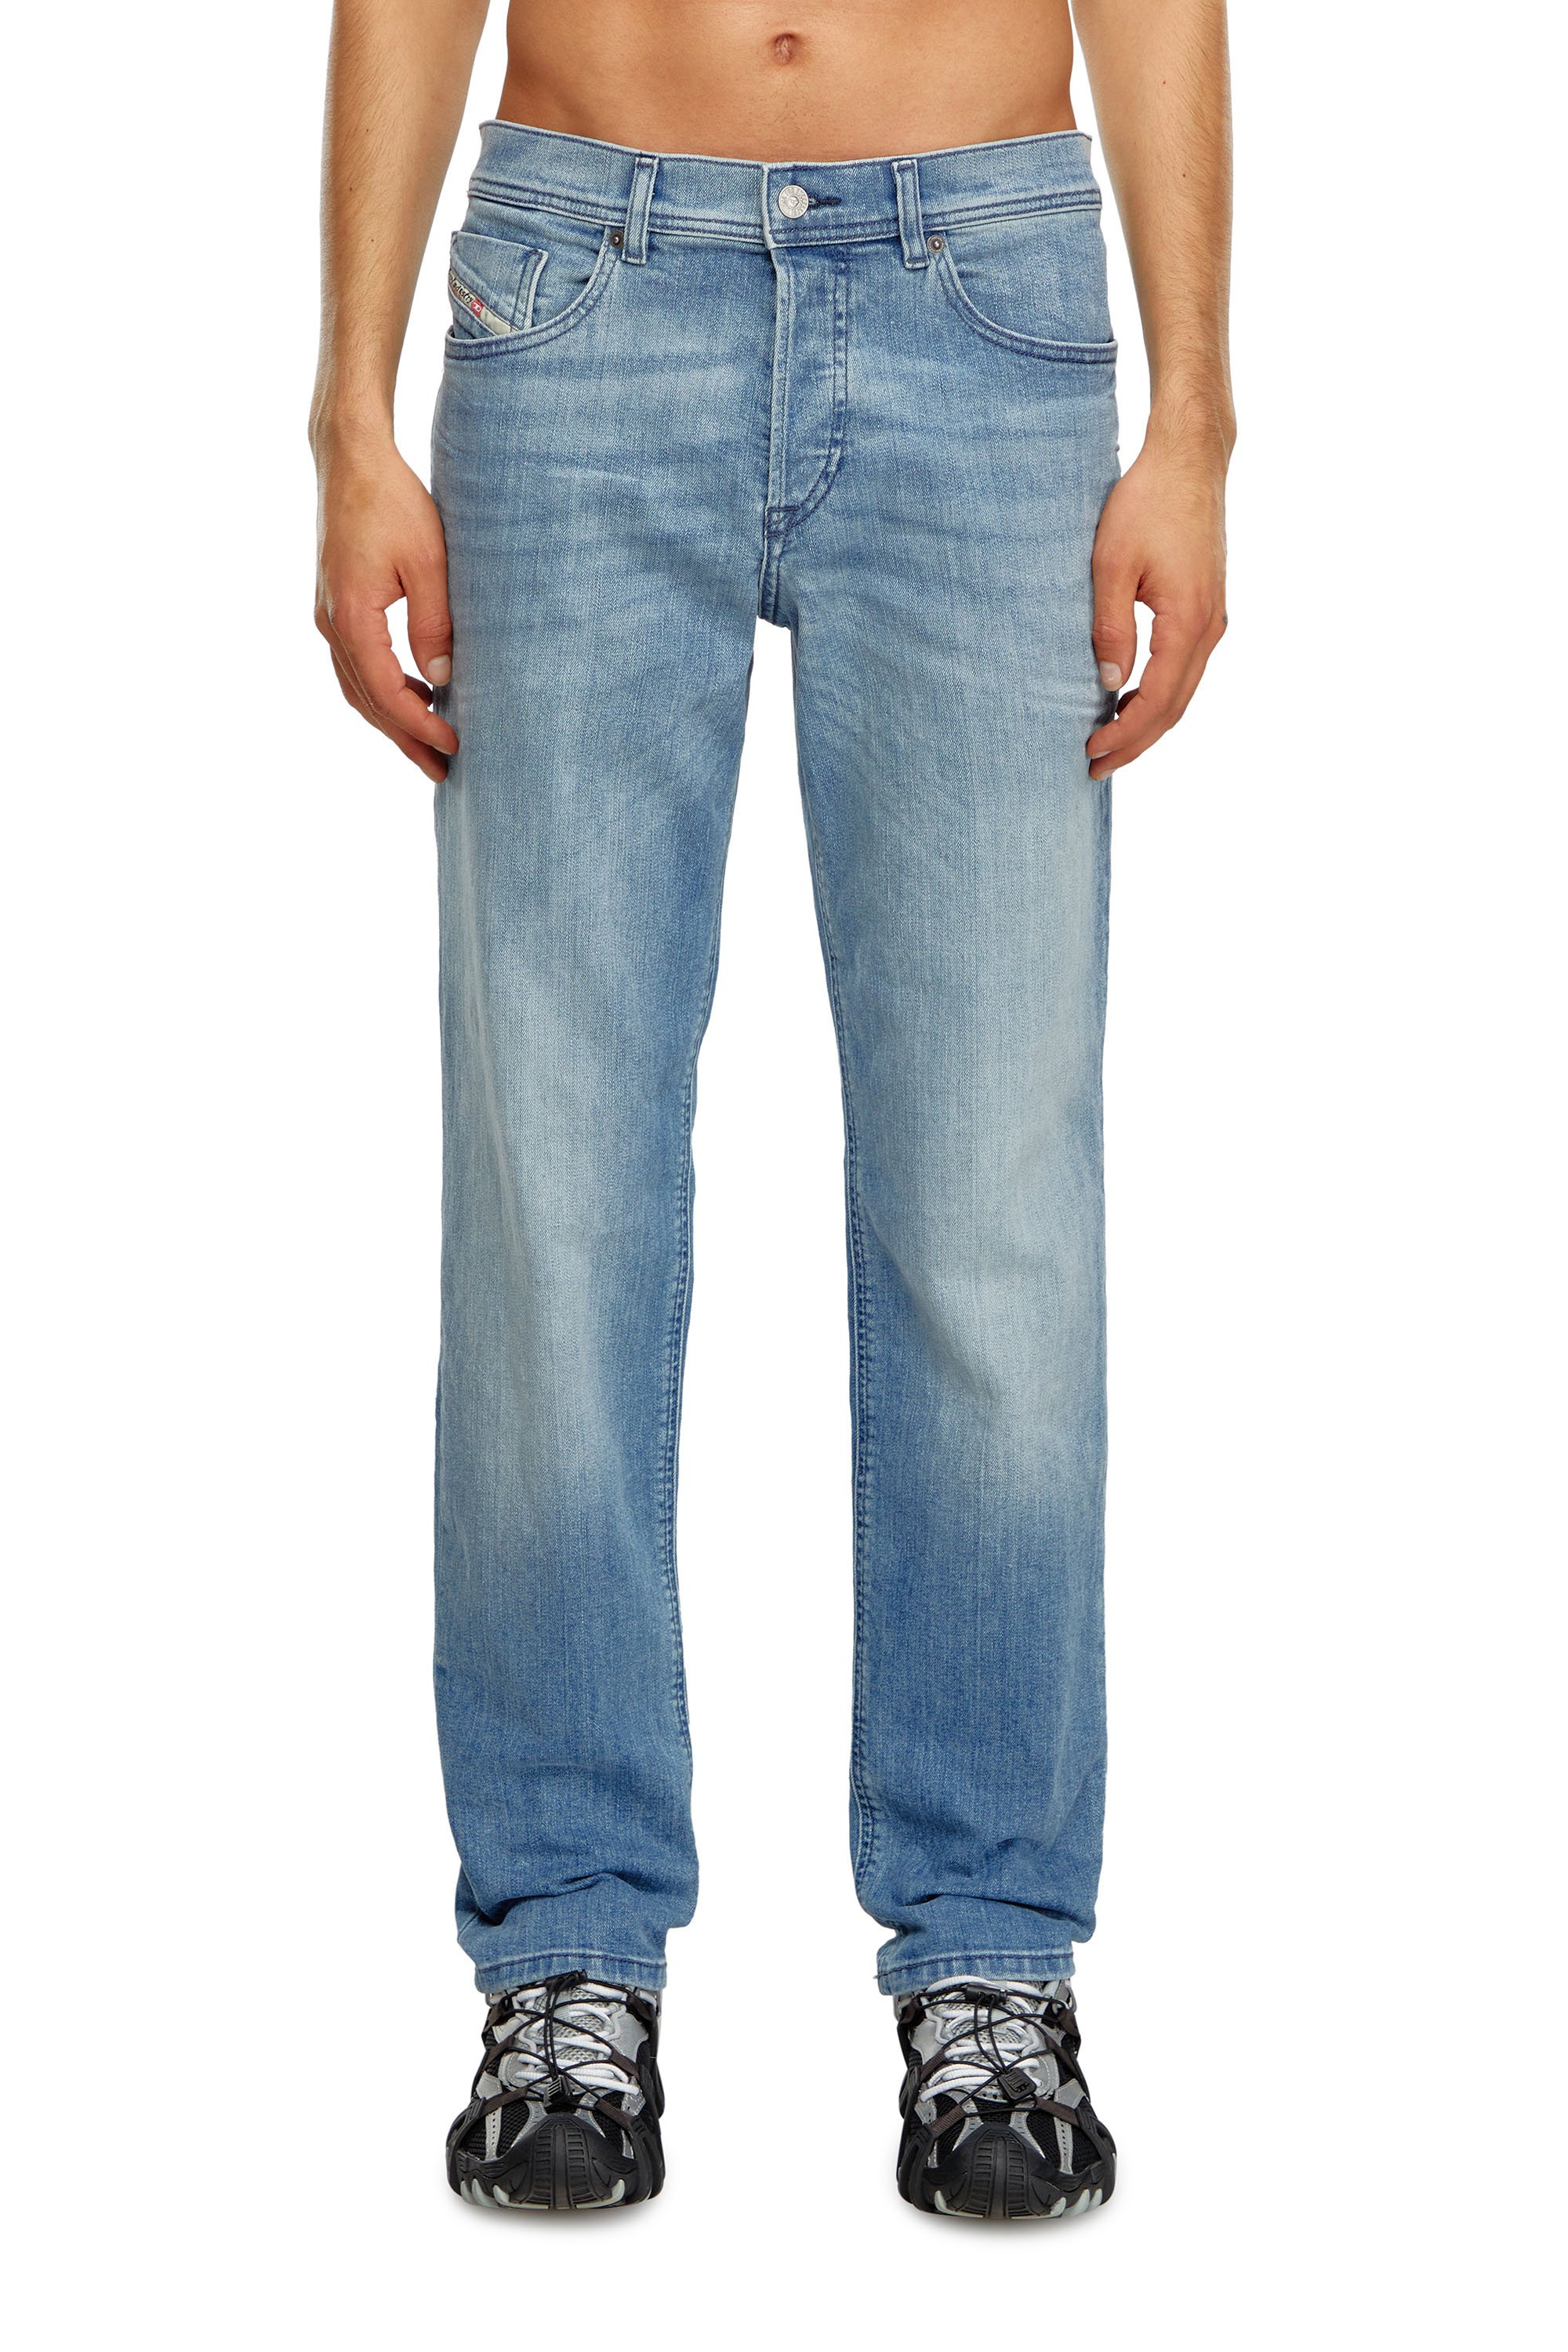 Diesel - Tapered Jeans 2023 D-Finitive 0GRDI, Hombre Tapered Jeans - 2023 D-Finitive in Azul marino - Image 1